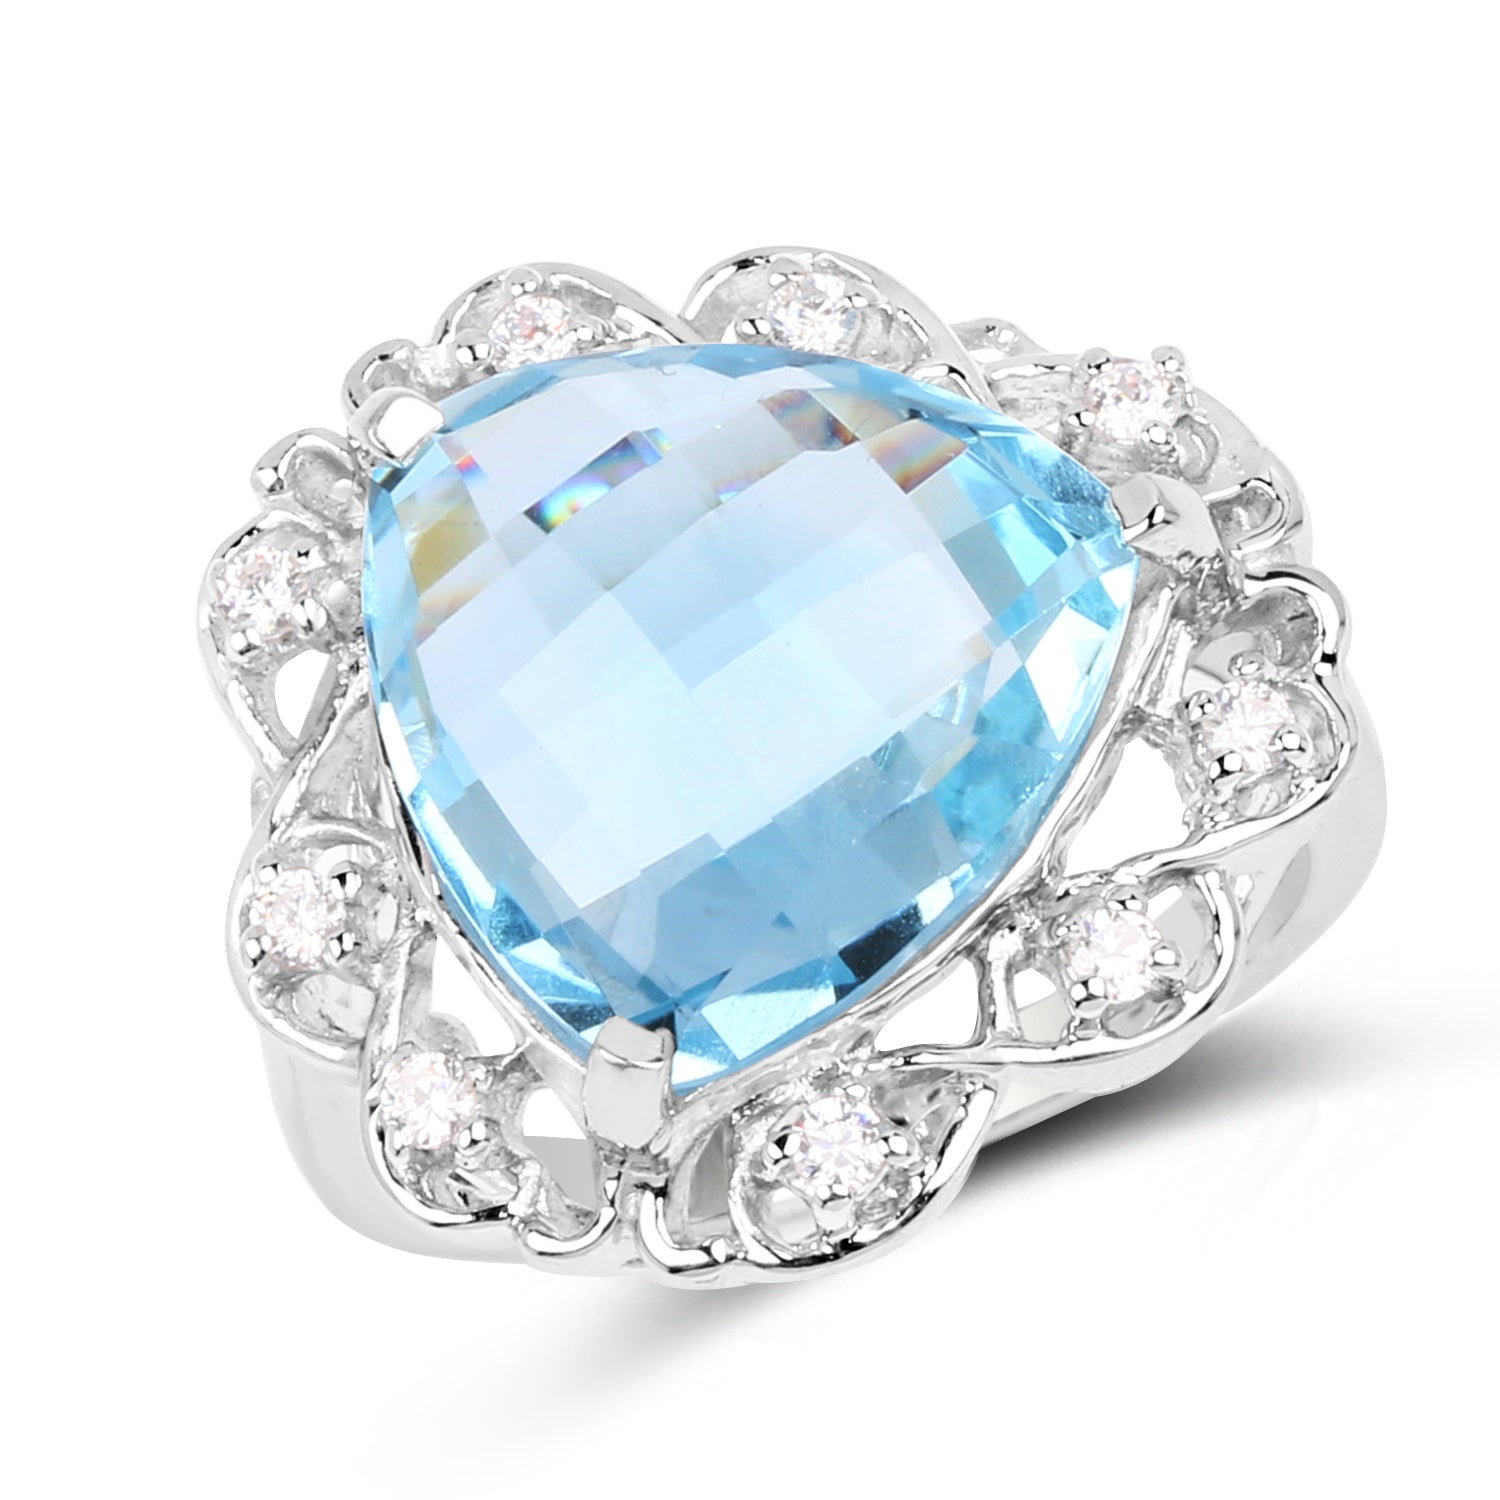 Blue Topaz and White Zircon Sterling Silver Ring - 11.01 ctw, Trillion Cut Stone, December Birthstone, Gift for Her Bijou Her